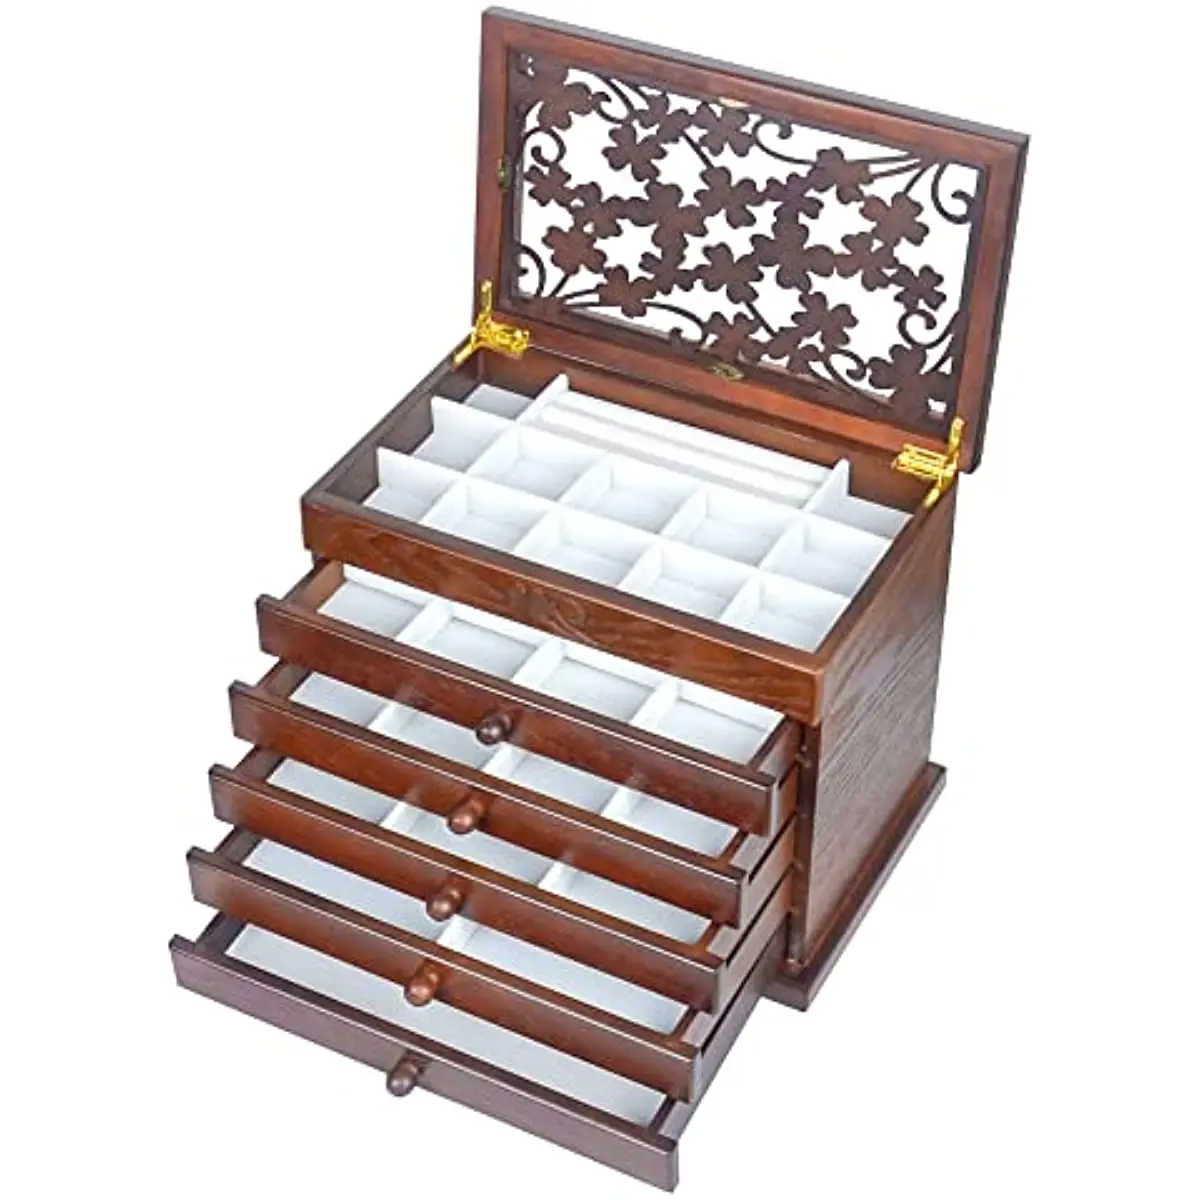 Kendal Jewelry Box for Women, Real Wooden Jewelry Organizer Box with Rose Leaf Patterns, 6 Layer with 5 Drawers Jewelry Boxes